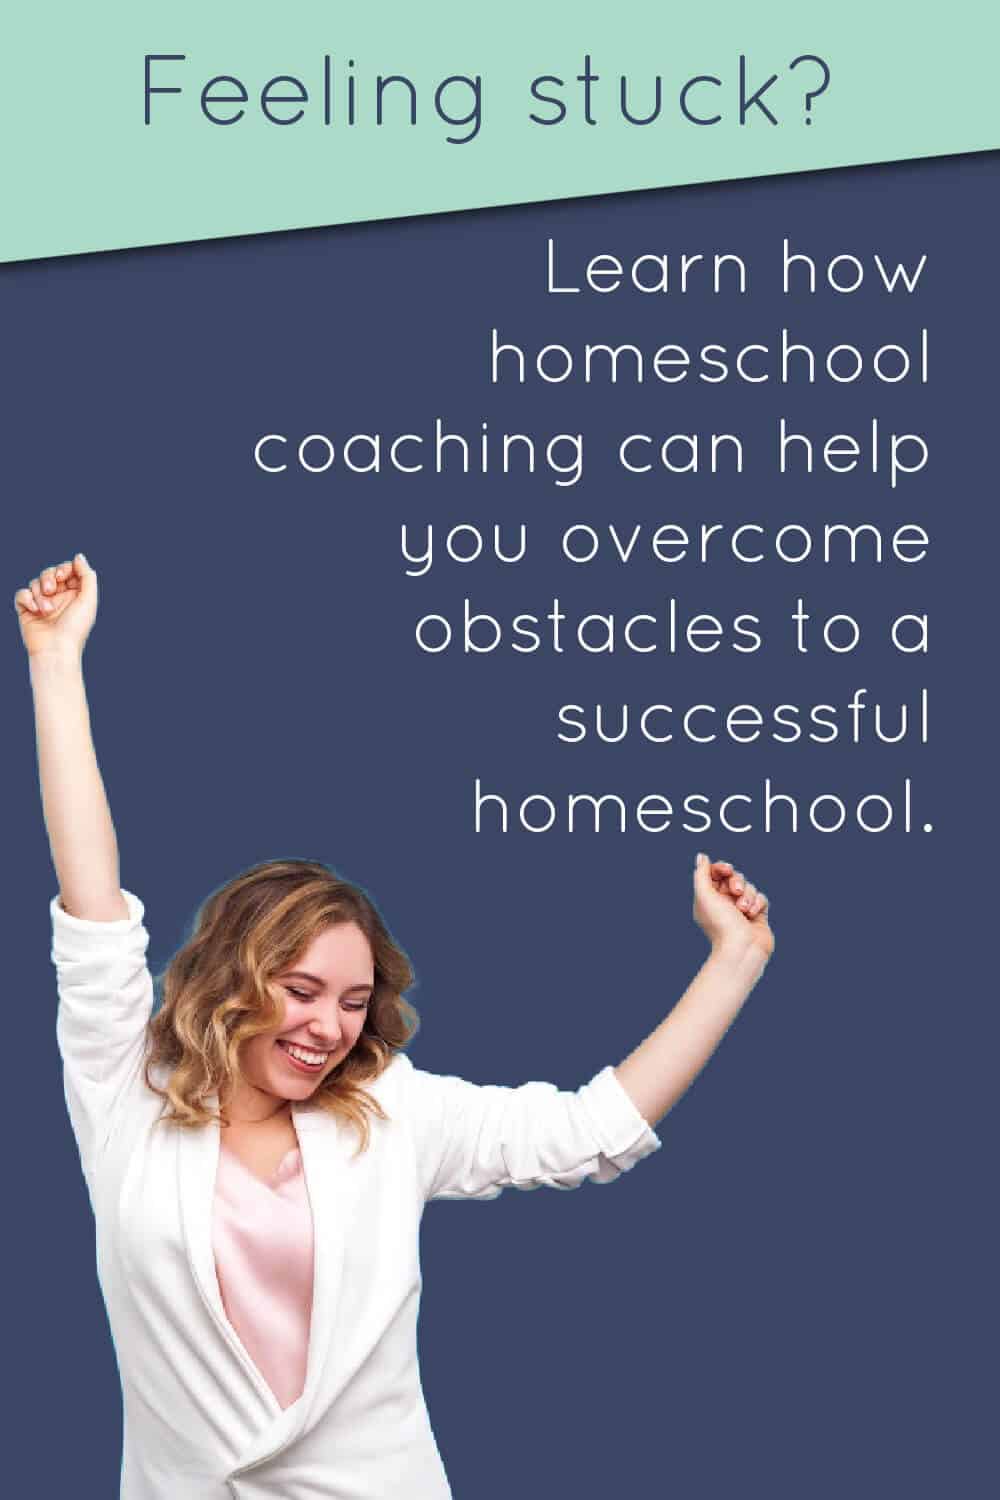 What if you could homeschool with confidence and joy? It is possible! And with personalized coaching, we can work together to make it happen. via @TriLearning